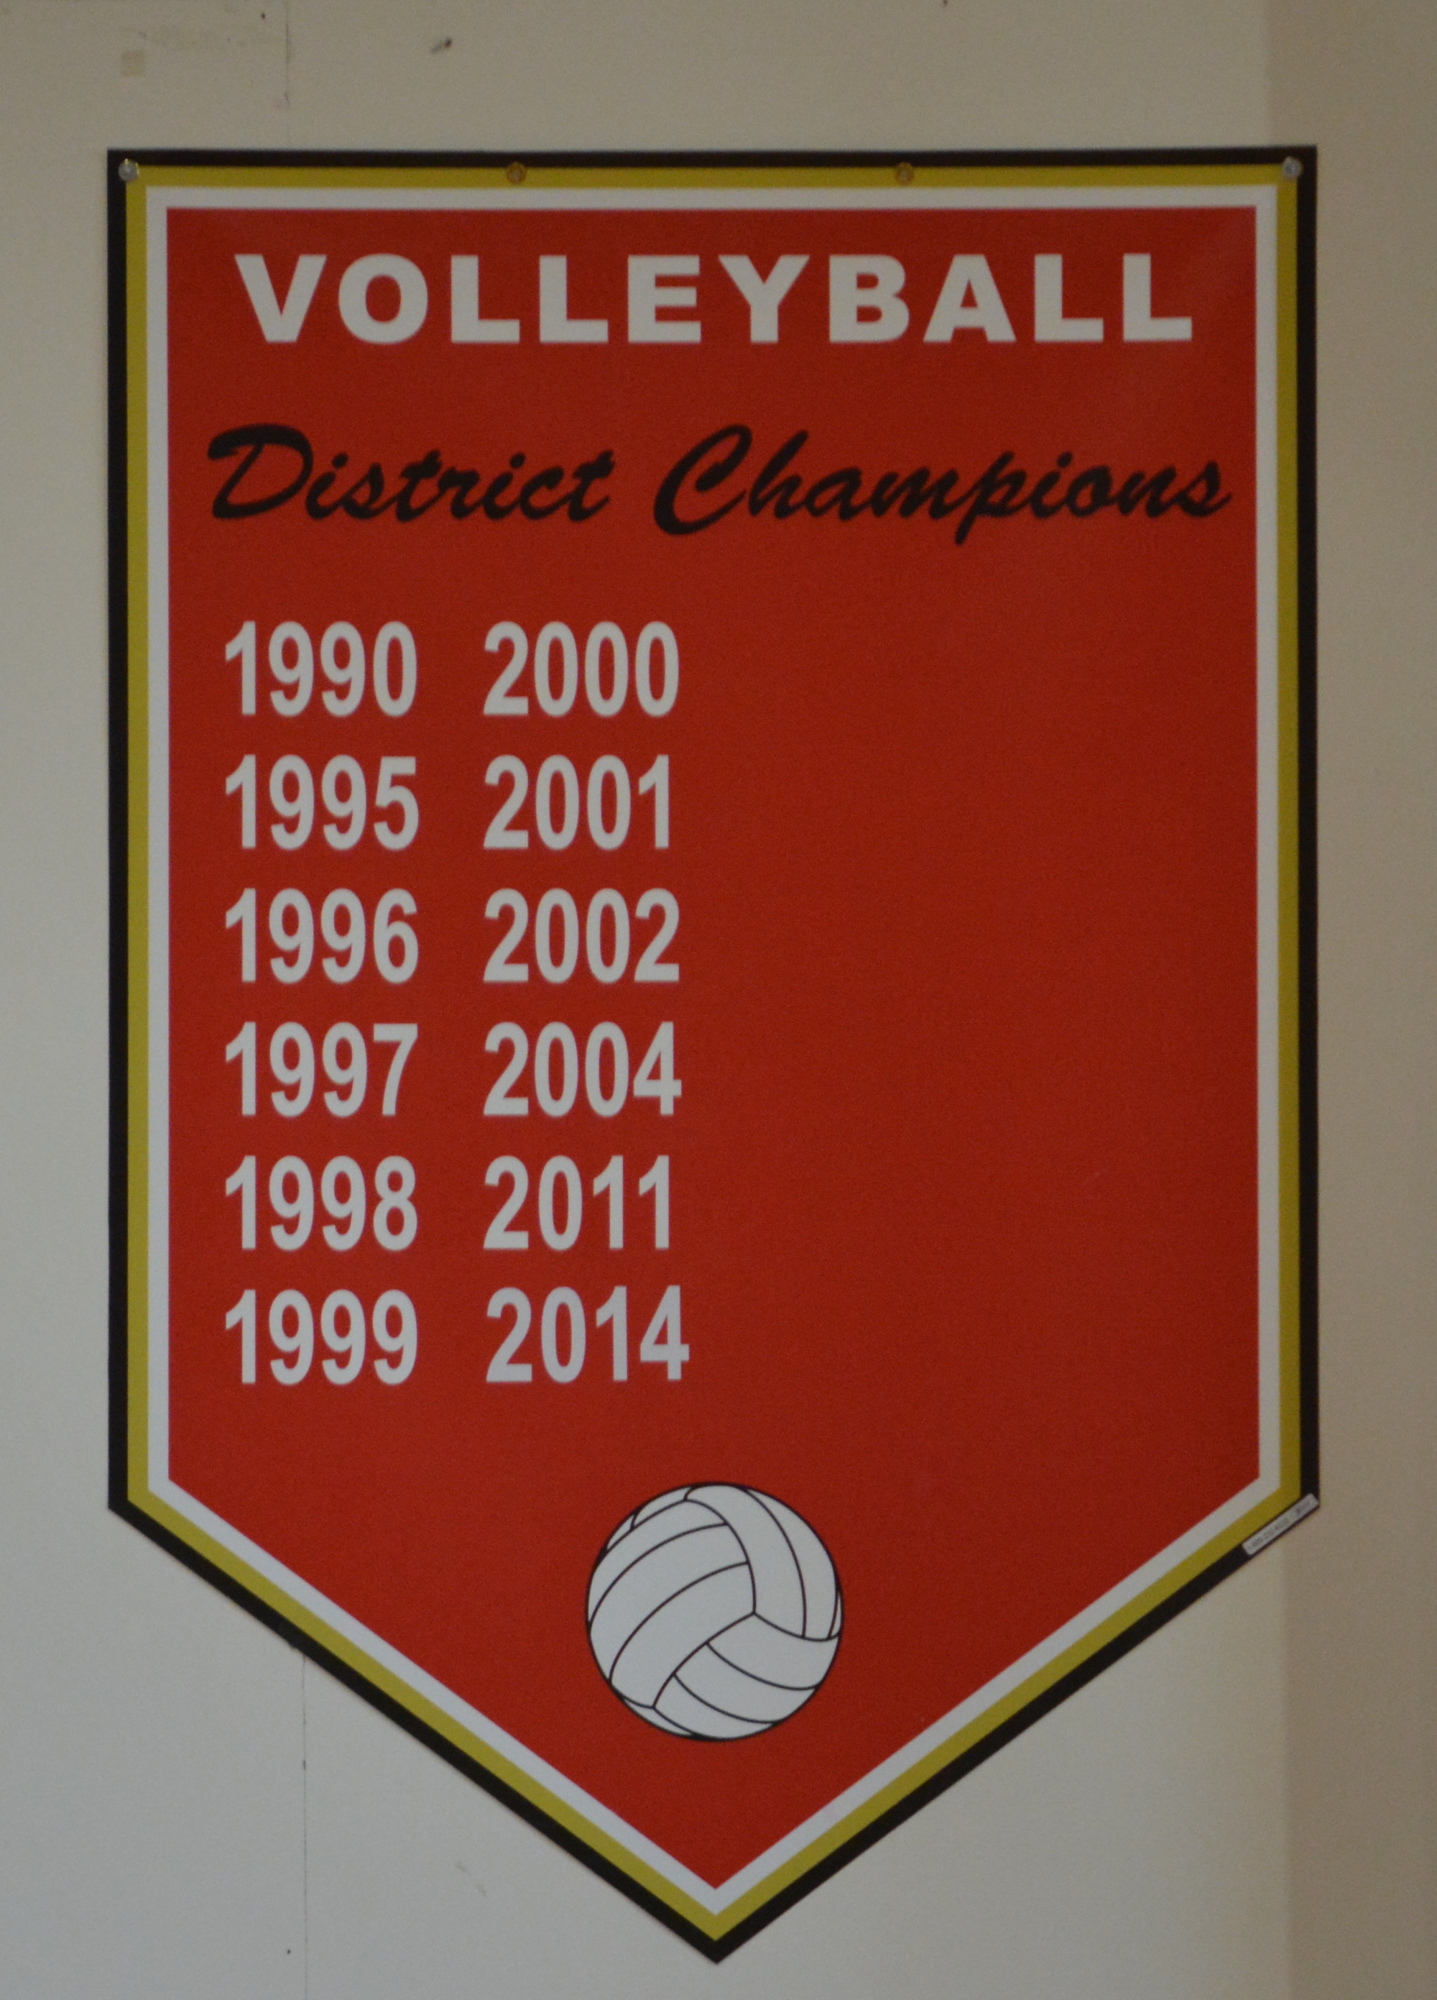 Cardinal Mooney will look to fill up the right side of this banner in the coming years under Sutton.